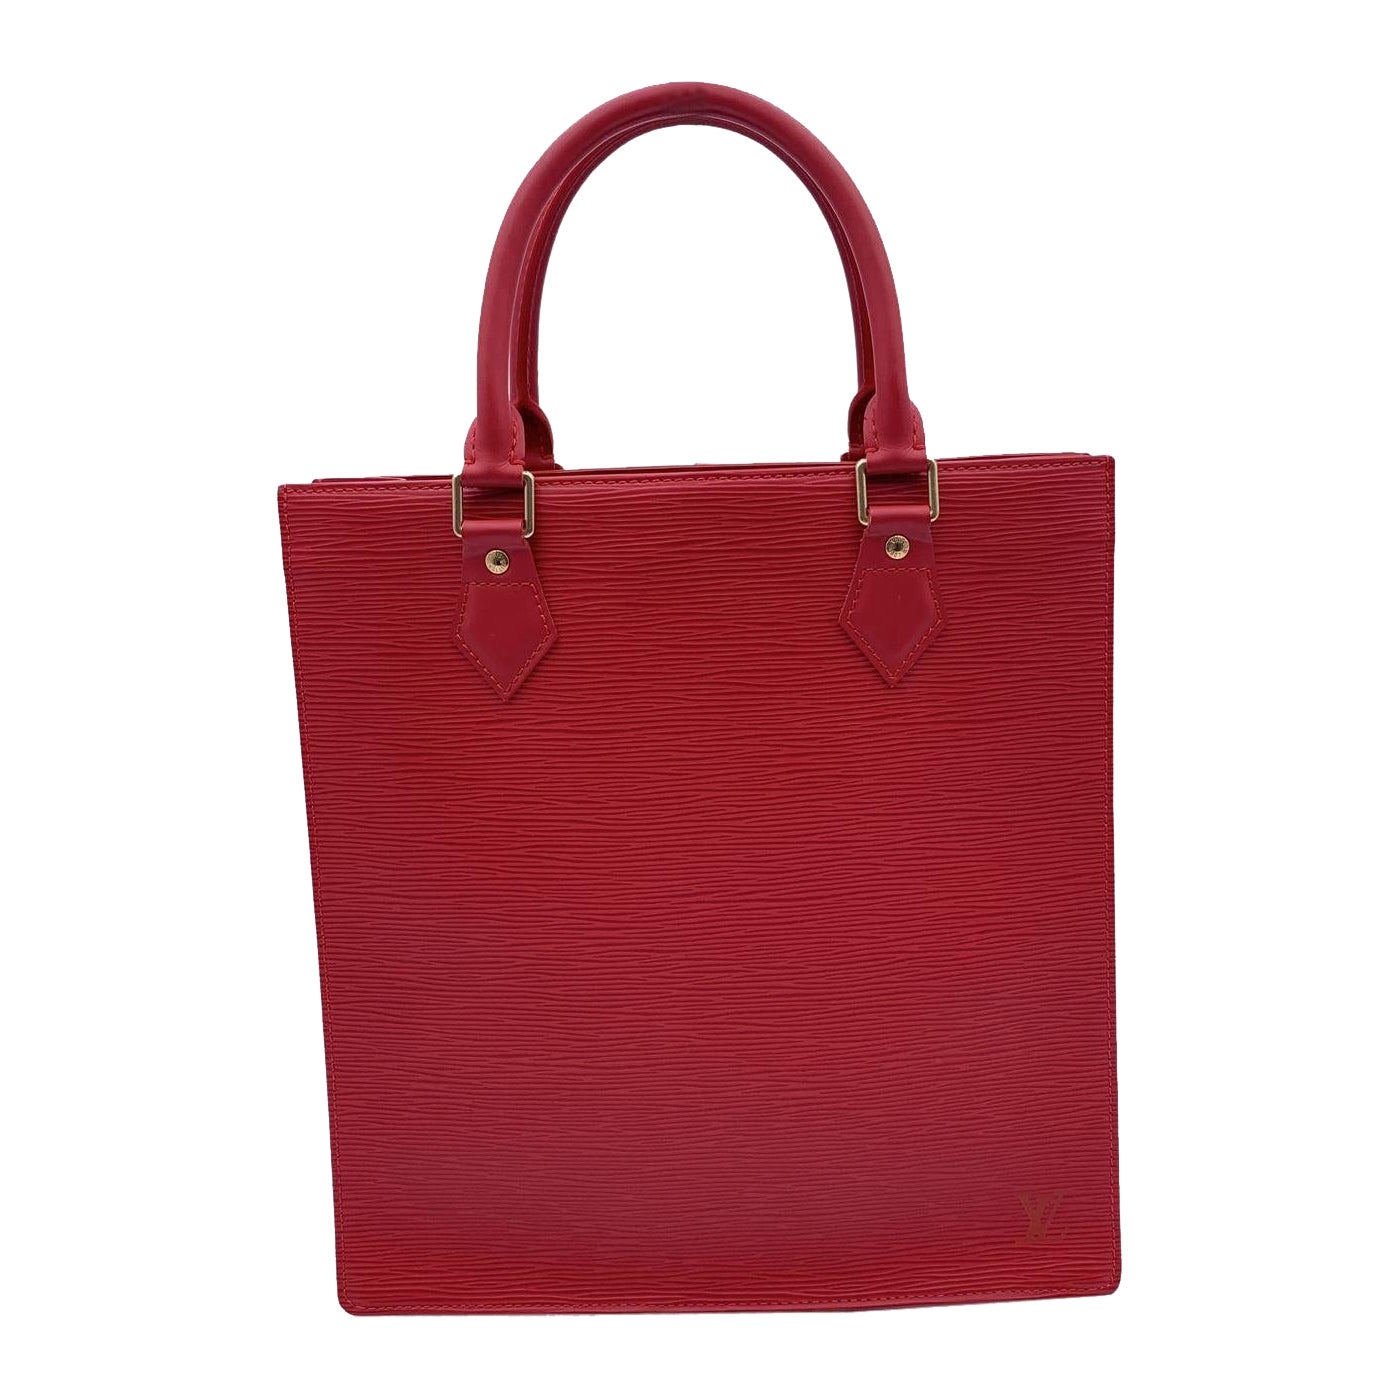 Louis Vuitton Red Epi Leather Sac Plat PM Tote Shopping Bag M5274E For Sale